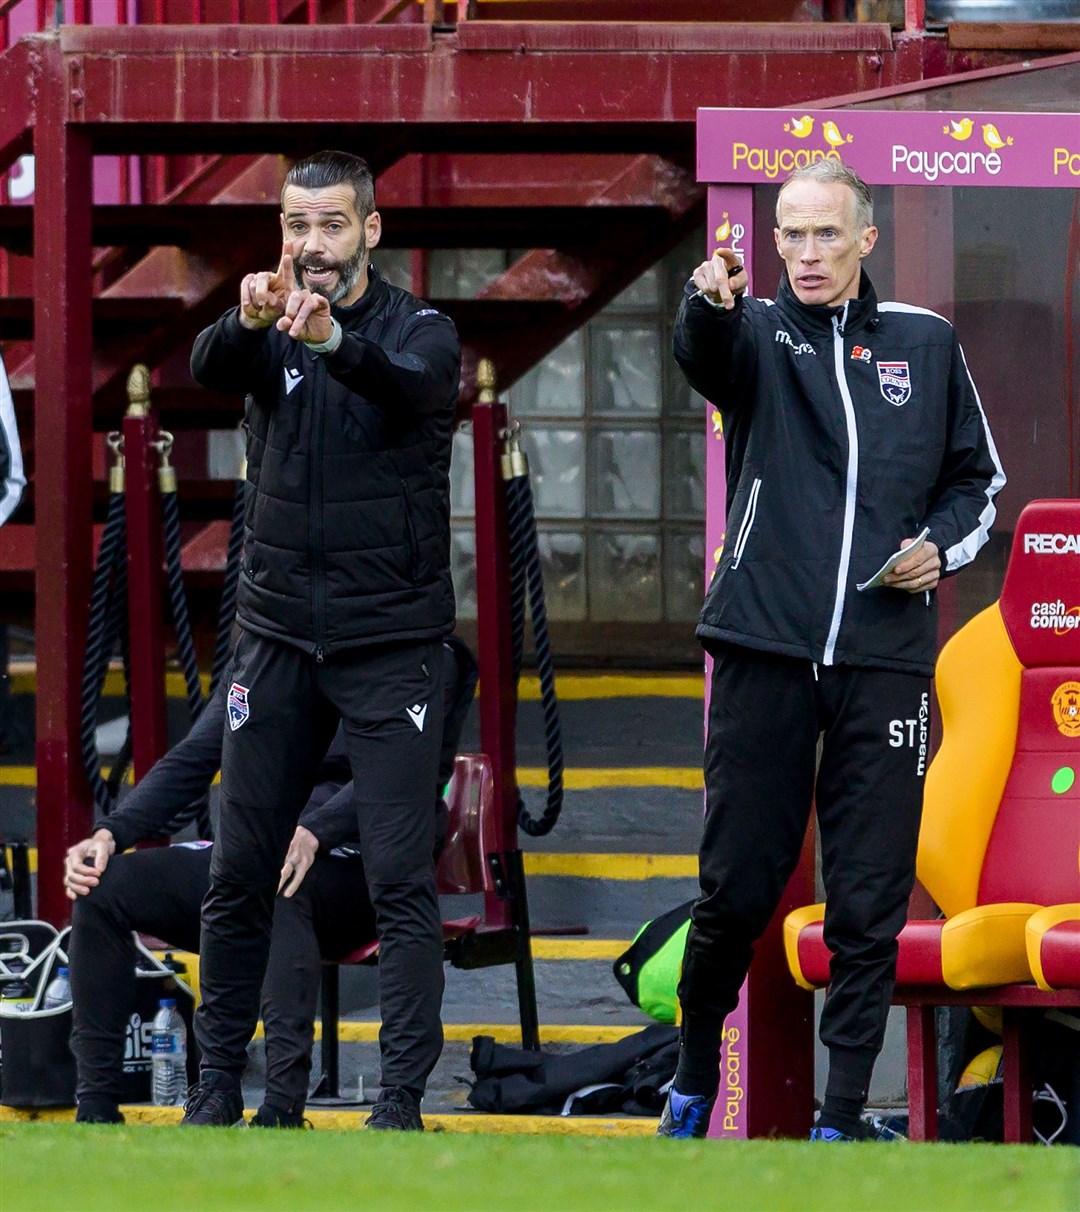 Picture - Ken Macpherson, Inverness. Motherwell(4) v Ross County(0). 24.10.19. Ross County manager Stuart Kettlewell..with goalkeeping coach Scott Thomson.